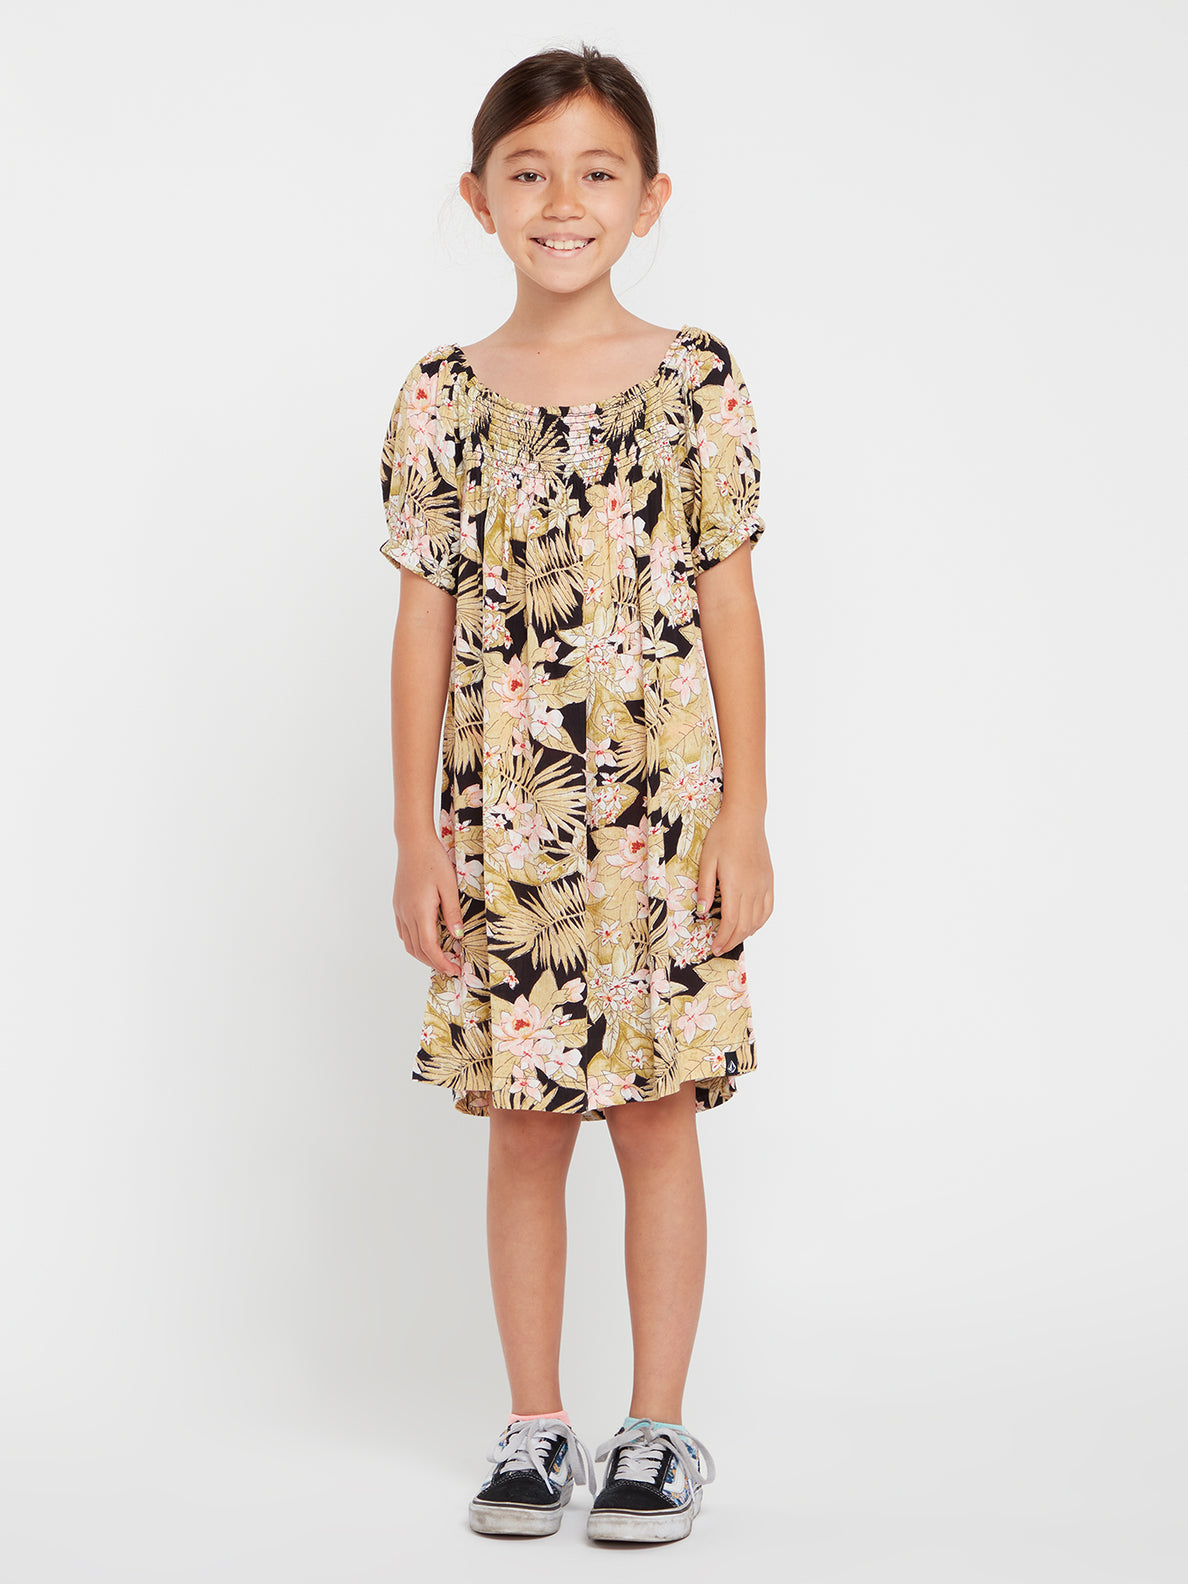 Girls Frondly Fire Dress - Black Combo